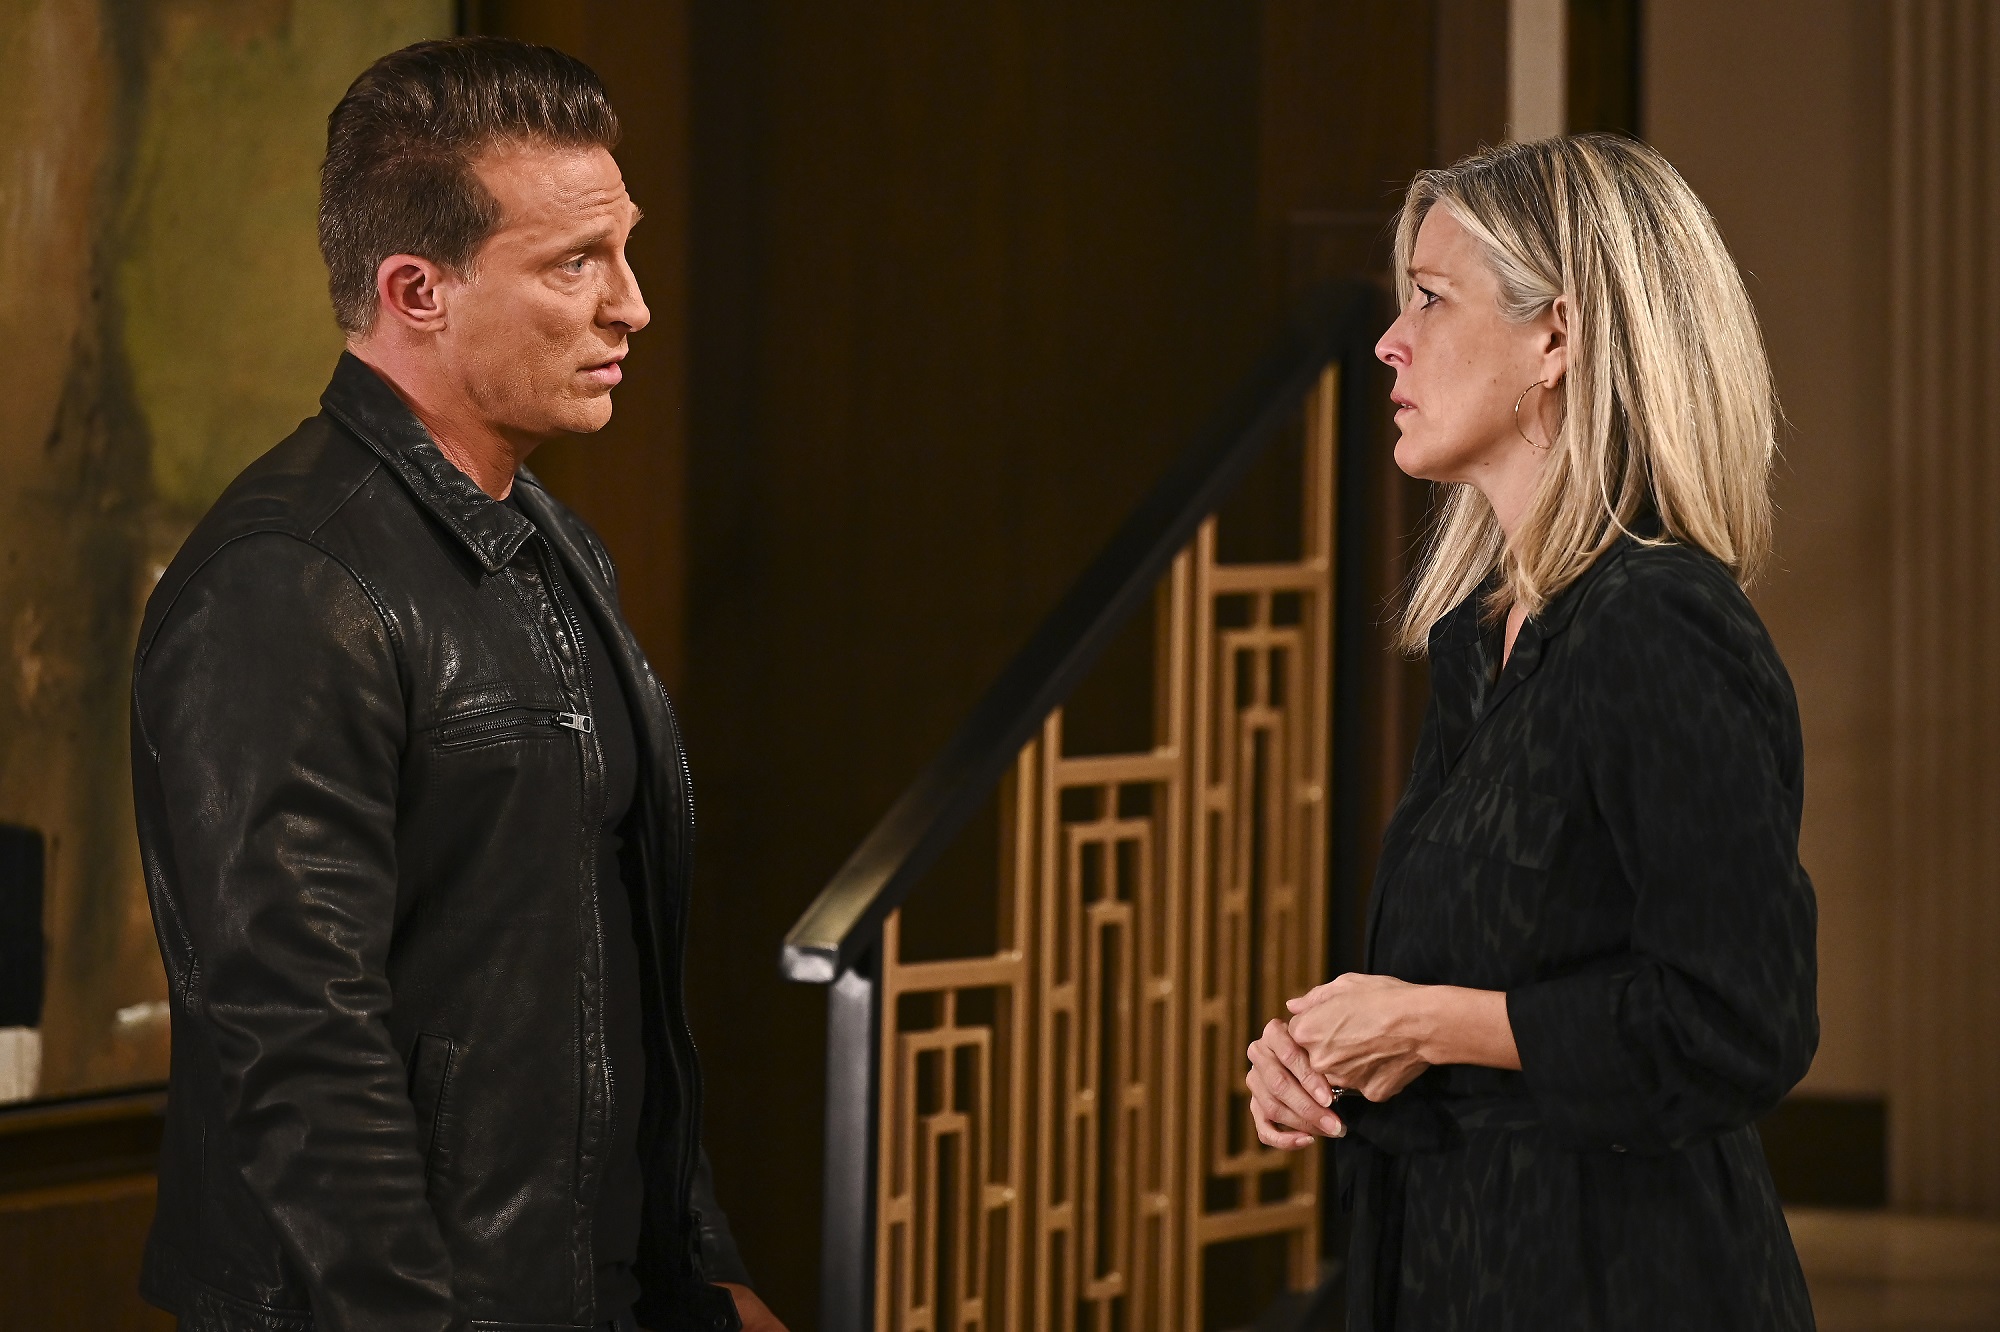 General Hospital speculation focuses on Carly and Jason, pictured here in all black clothing against a wood backdrop